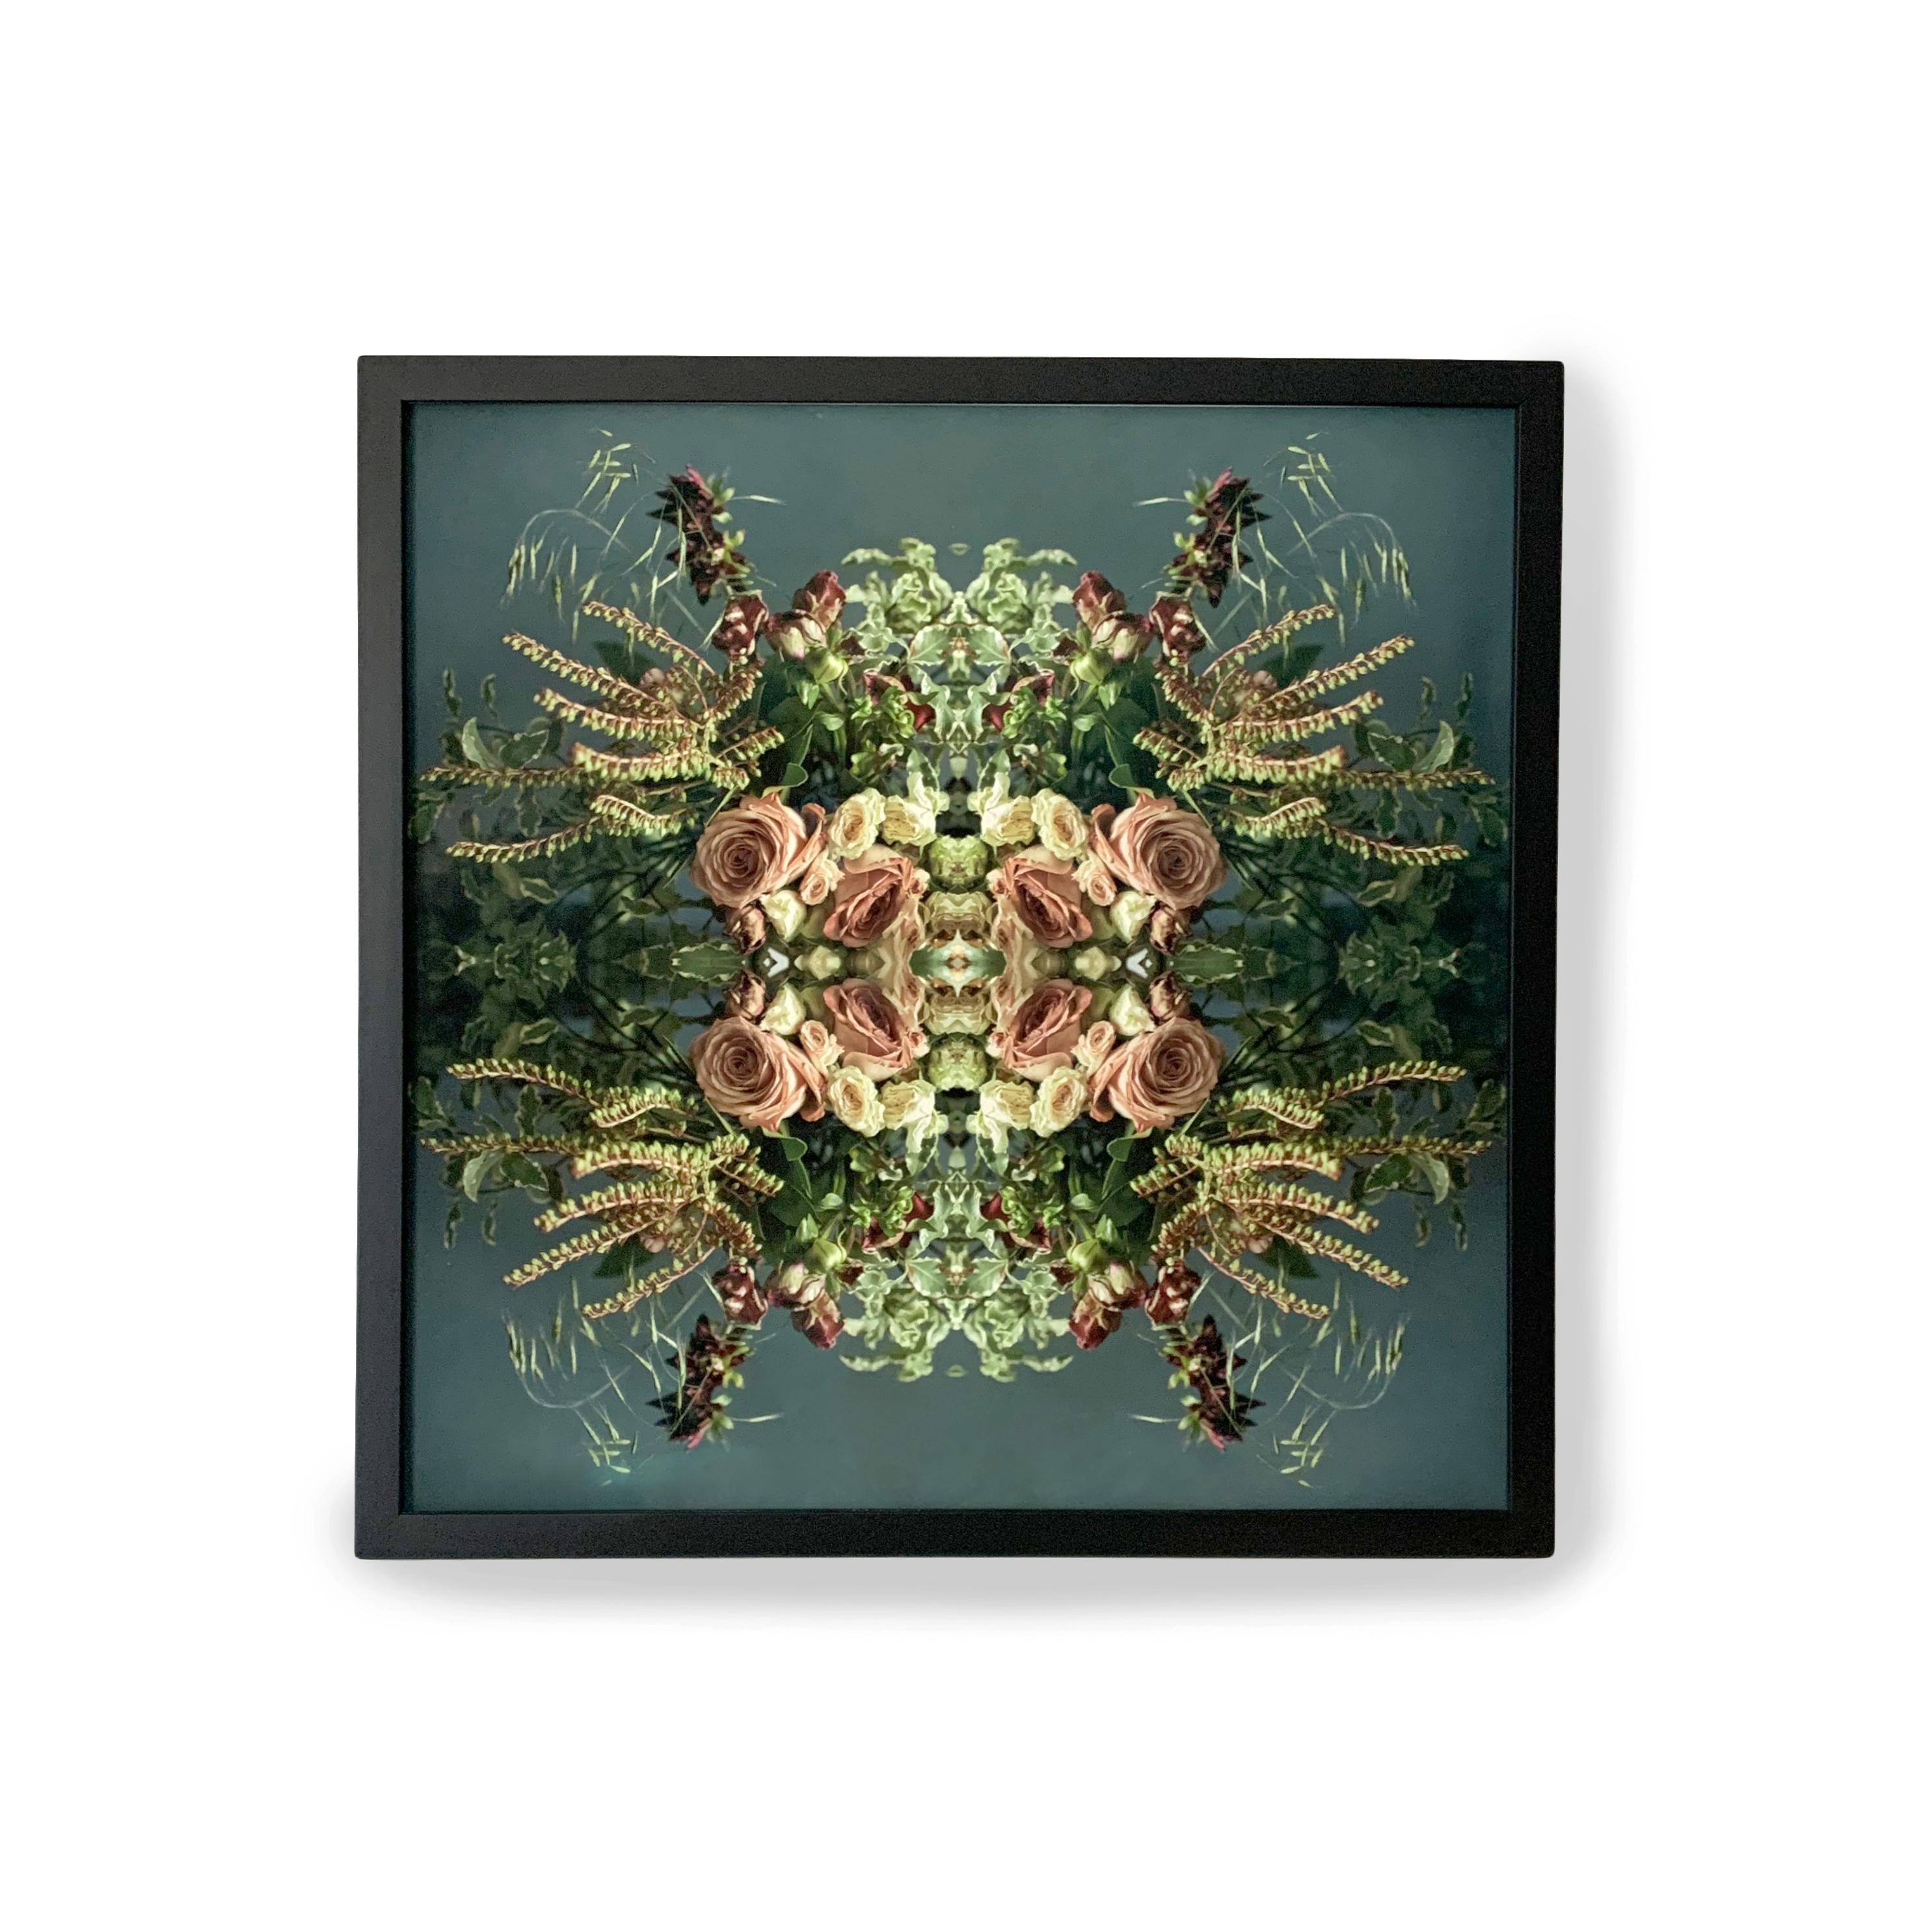 This print features the playful relationship between natural forms and botanicals. In this image Erin uses the natural composition of the pink, purple, green, white and deep red flowers, and her own collage work, to create a hypnotic mandala with